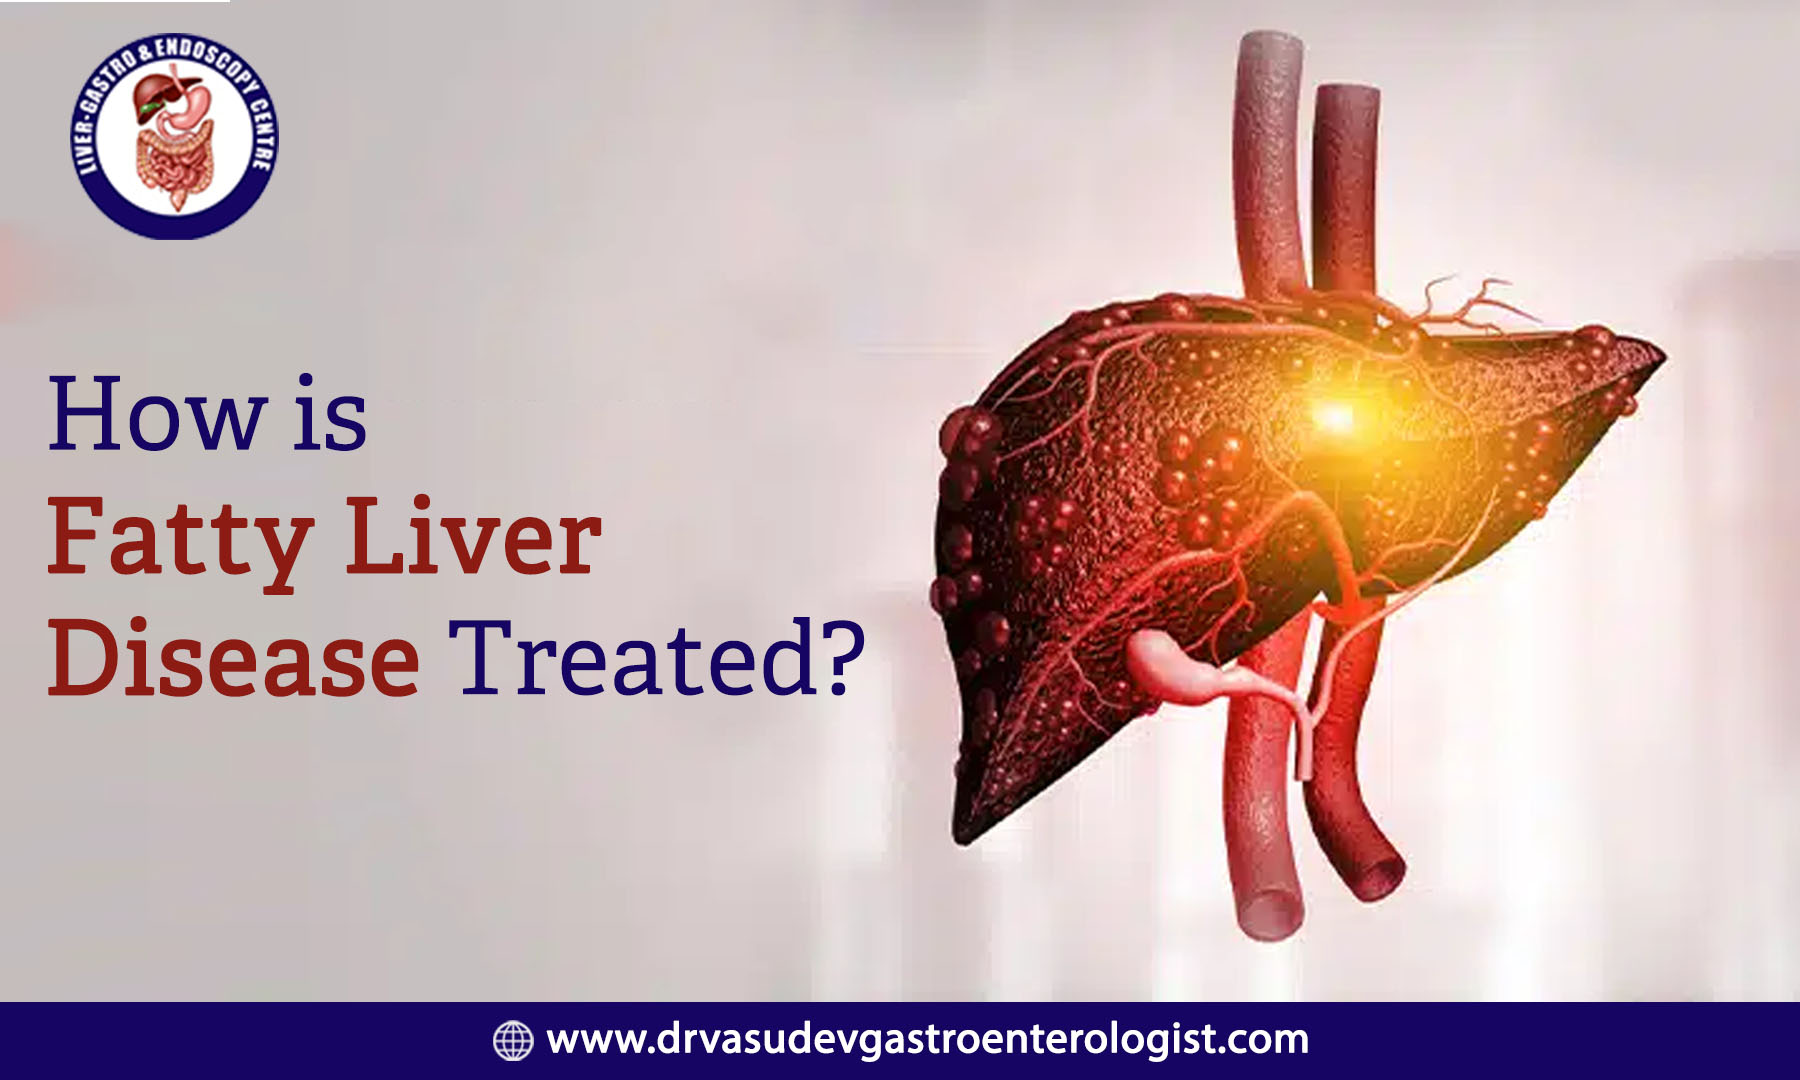 How Is Fatty Liver Disease Treated?